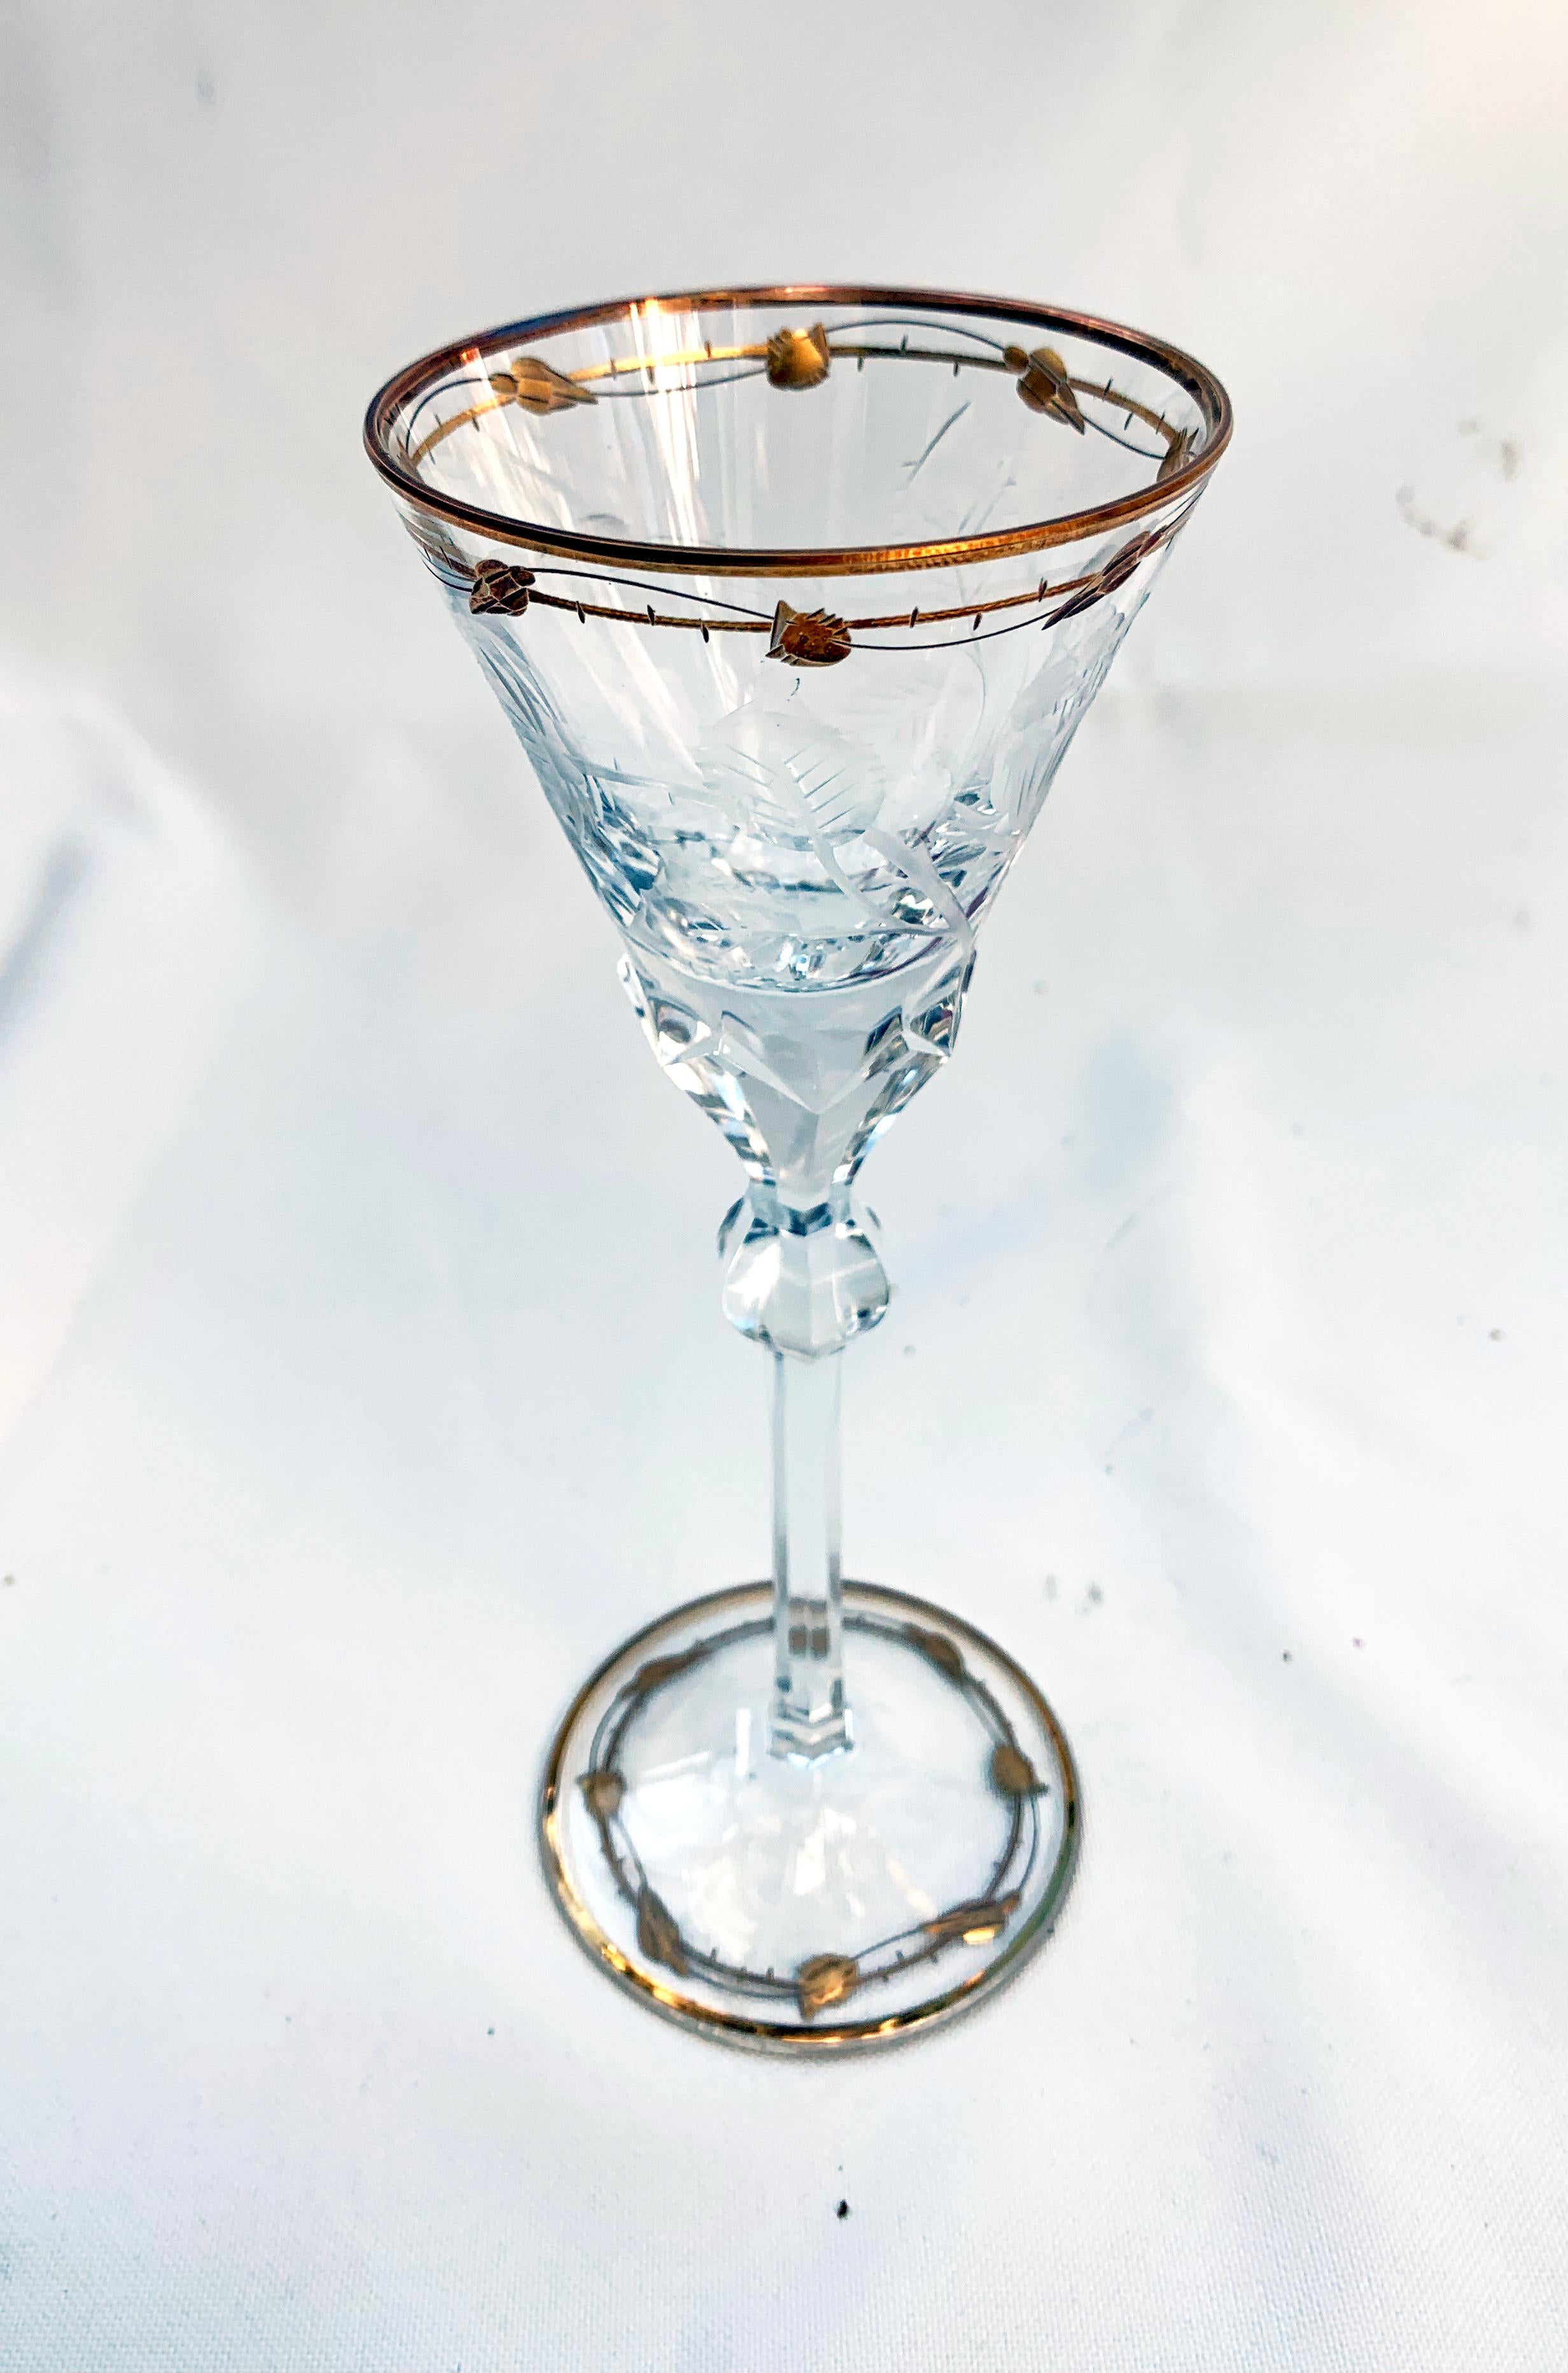 This is 1 wine glass made of hand blown crystal by Moser in the ever popular Art Nouveau 